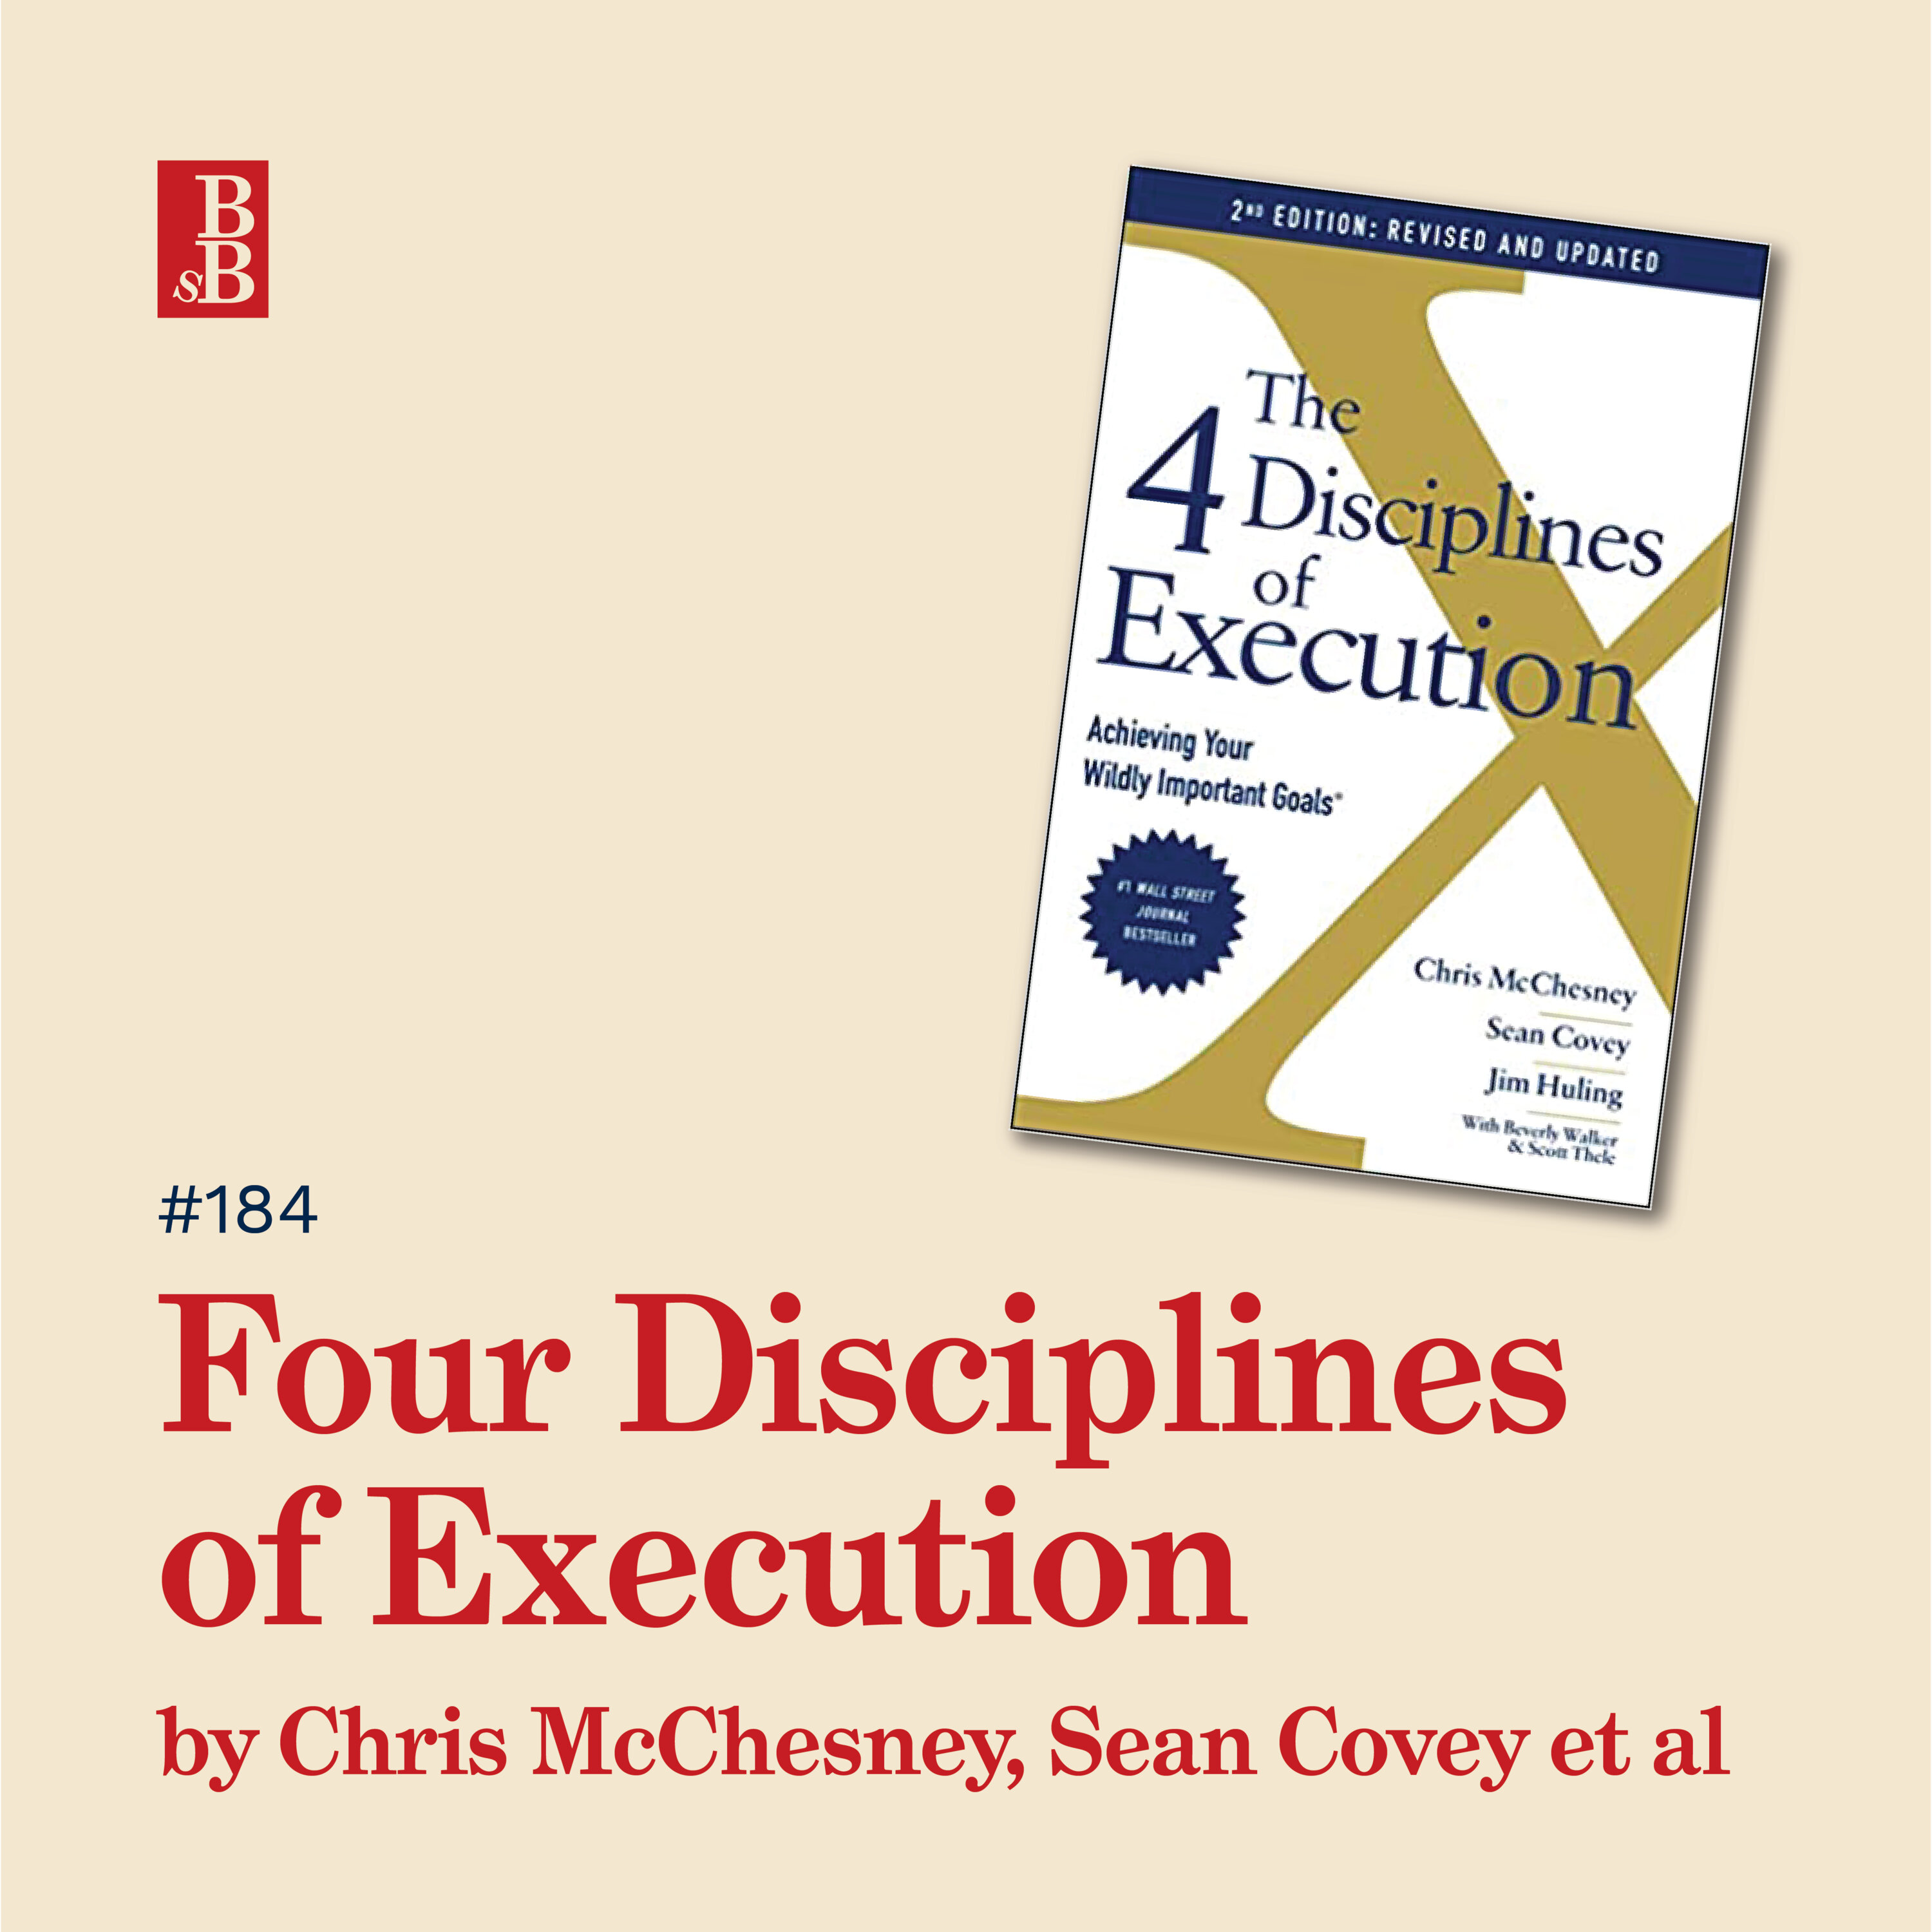 The Four Disciplines of Execution by Chris McChesney, Sean Covey et a: why accountability is the secret sauce to success